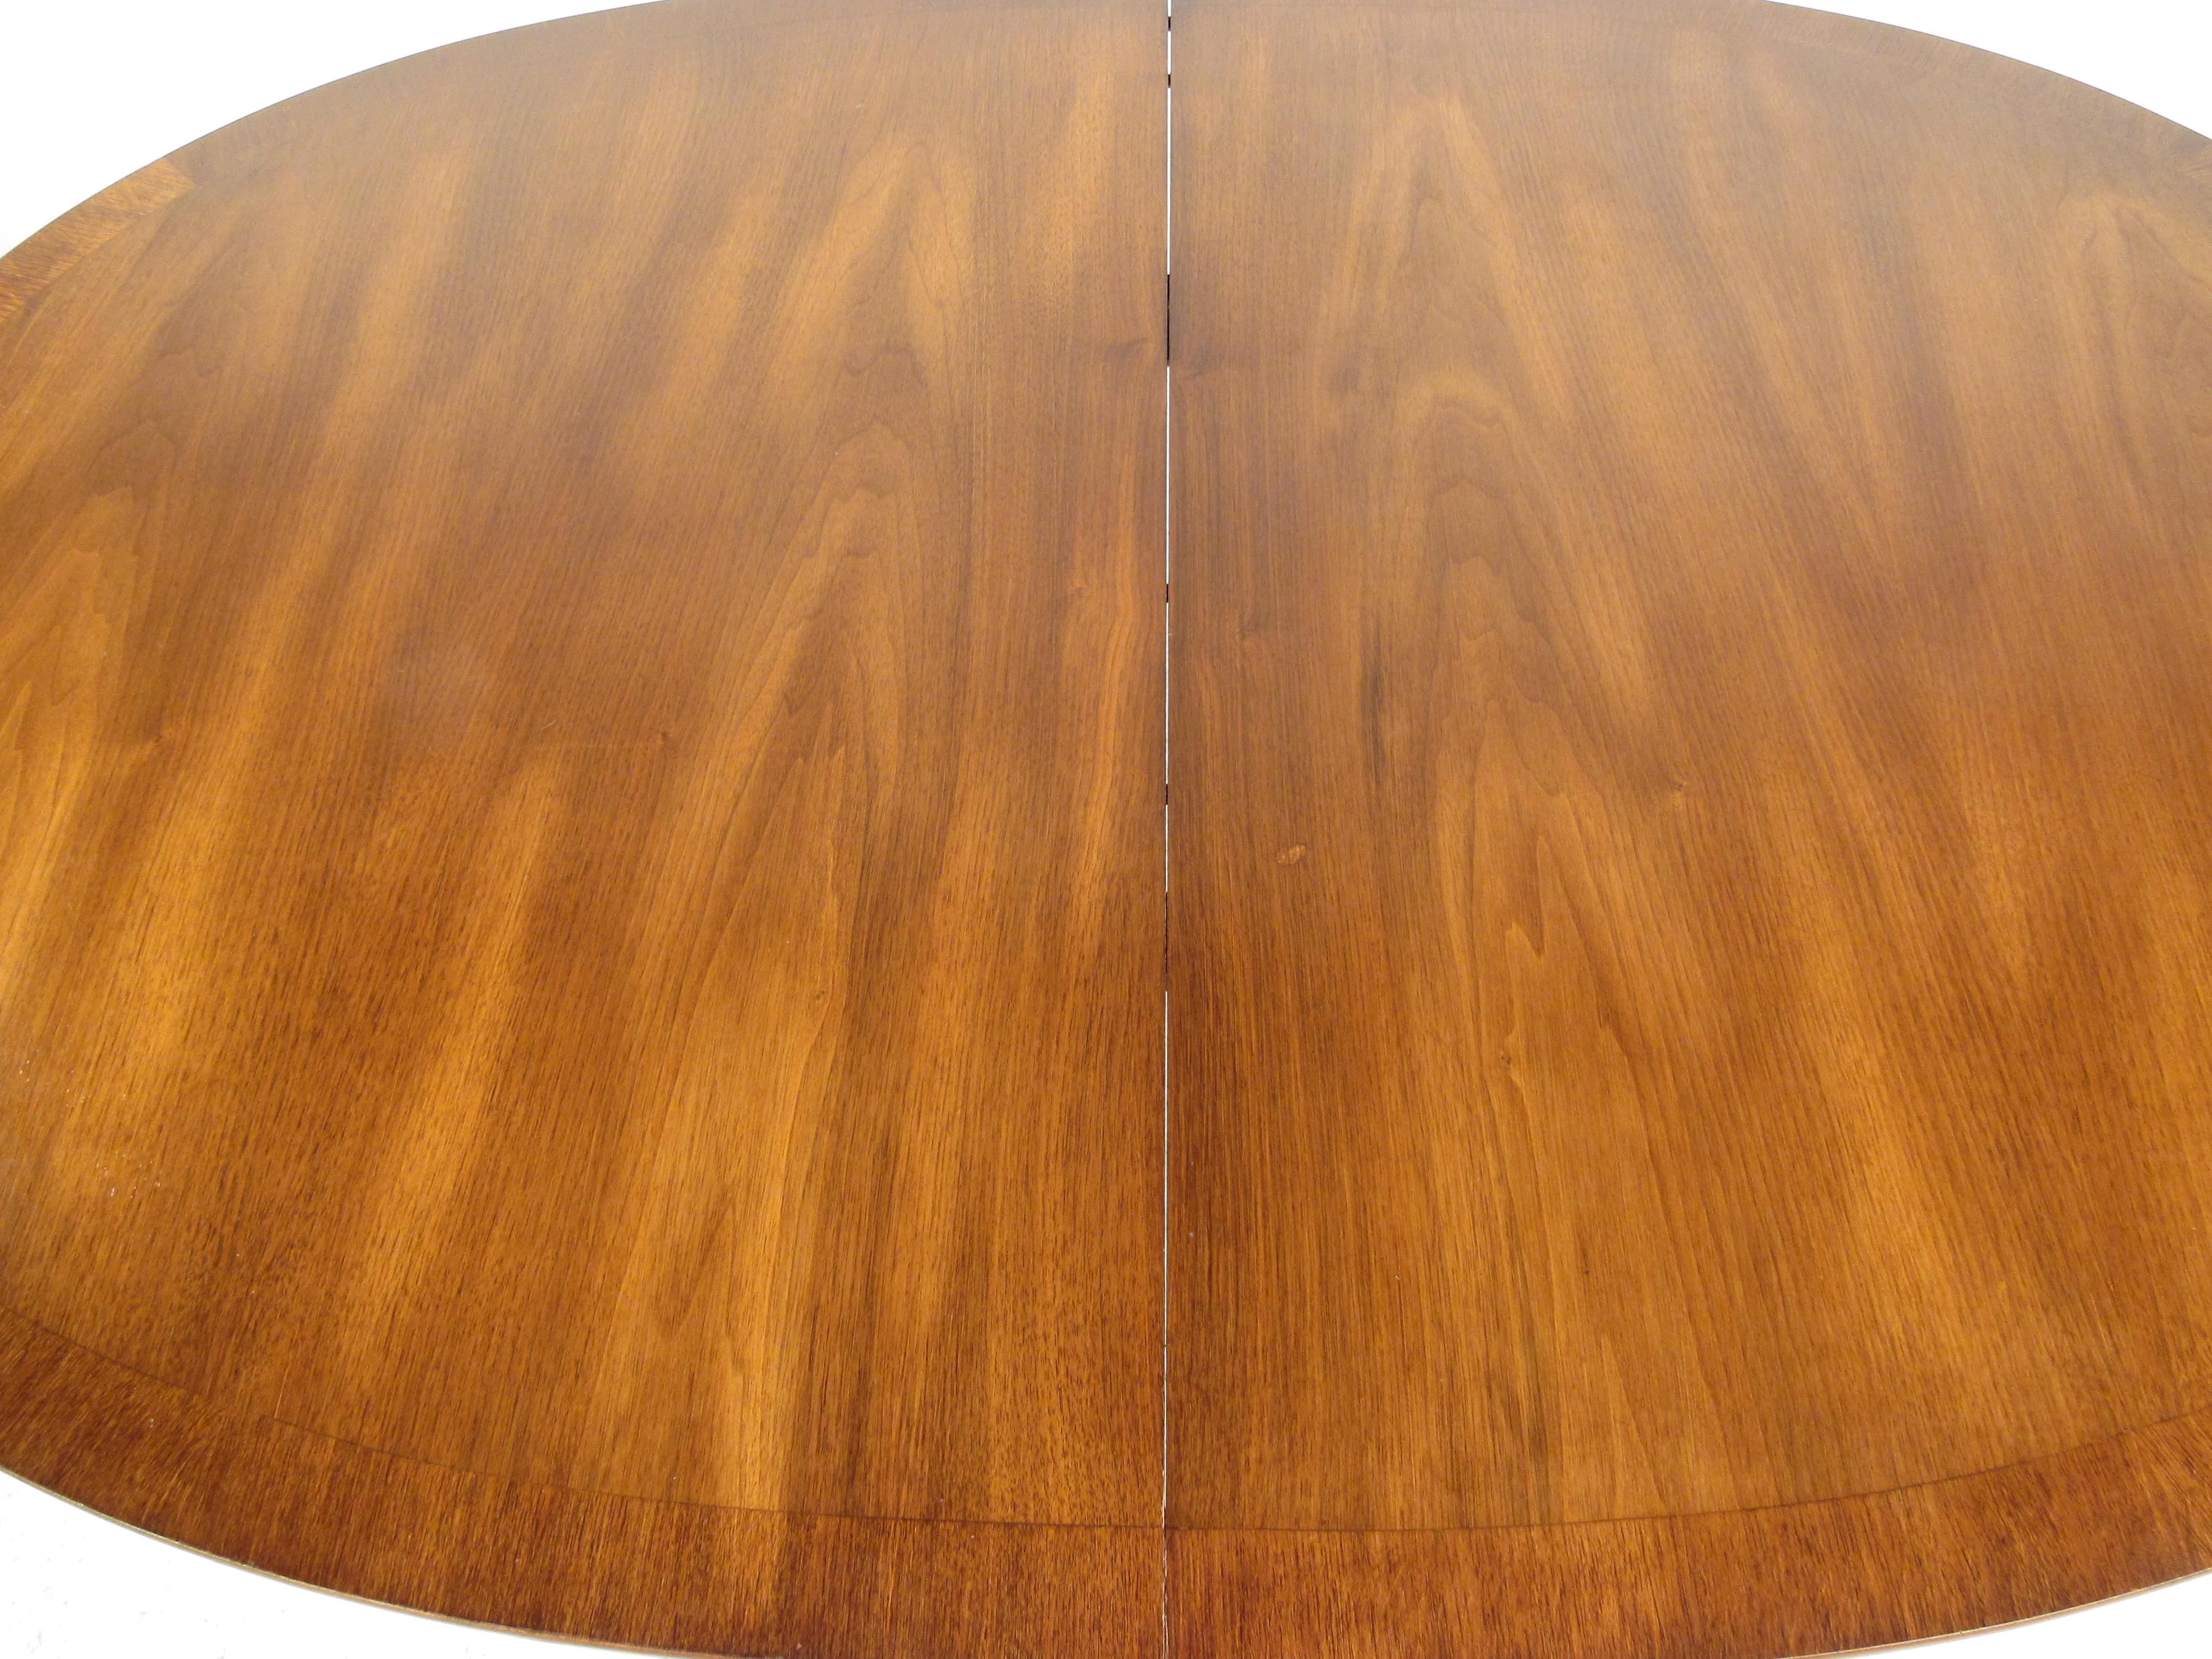 Oval Midcentury Walnut Dining Table by White Furniture Company 8